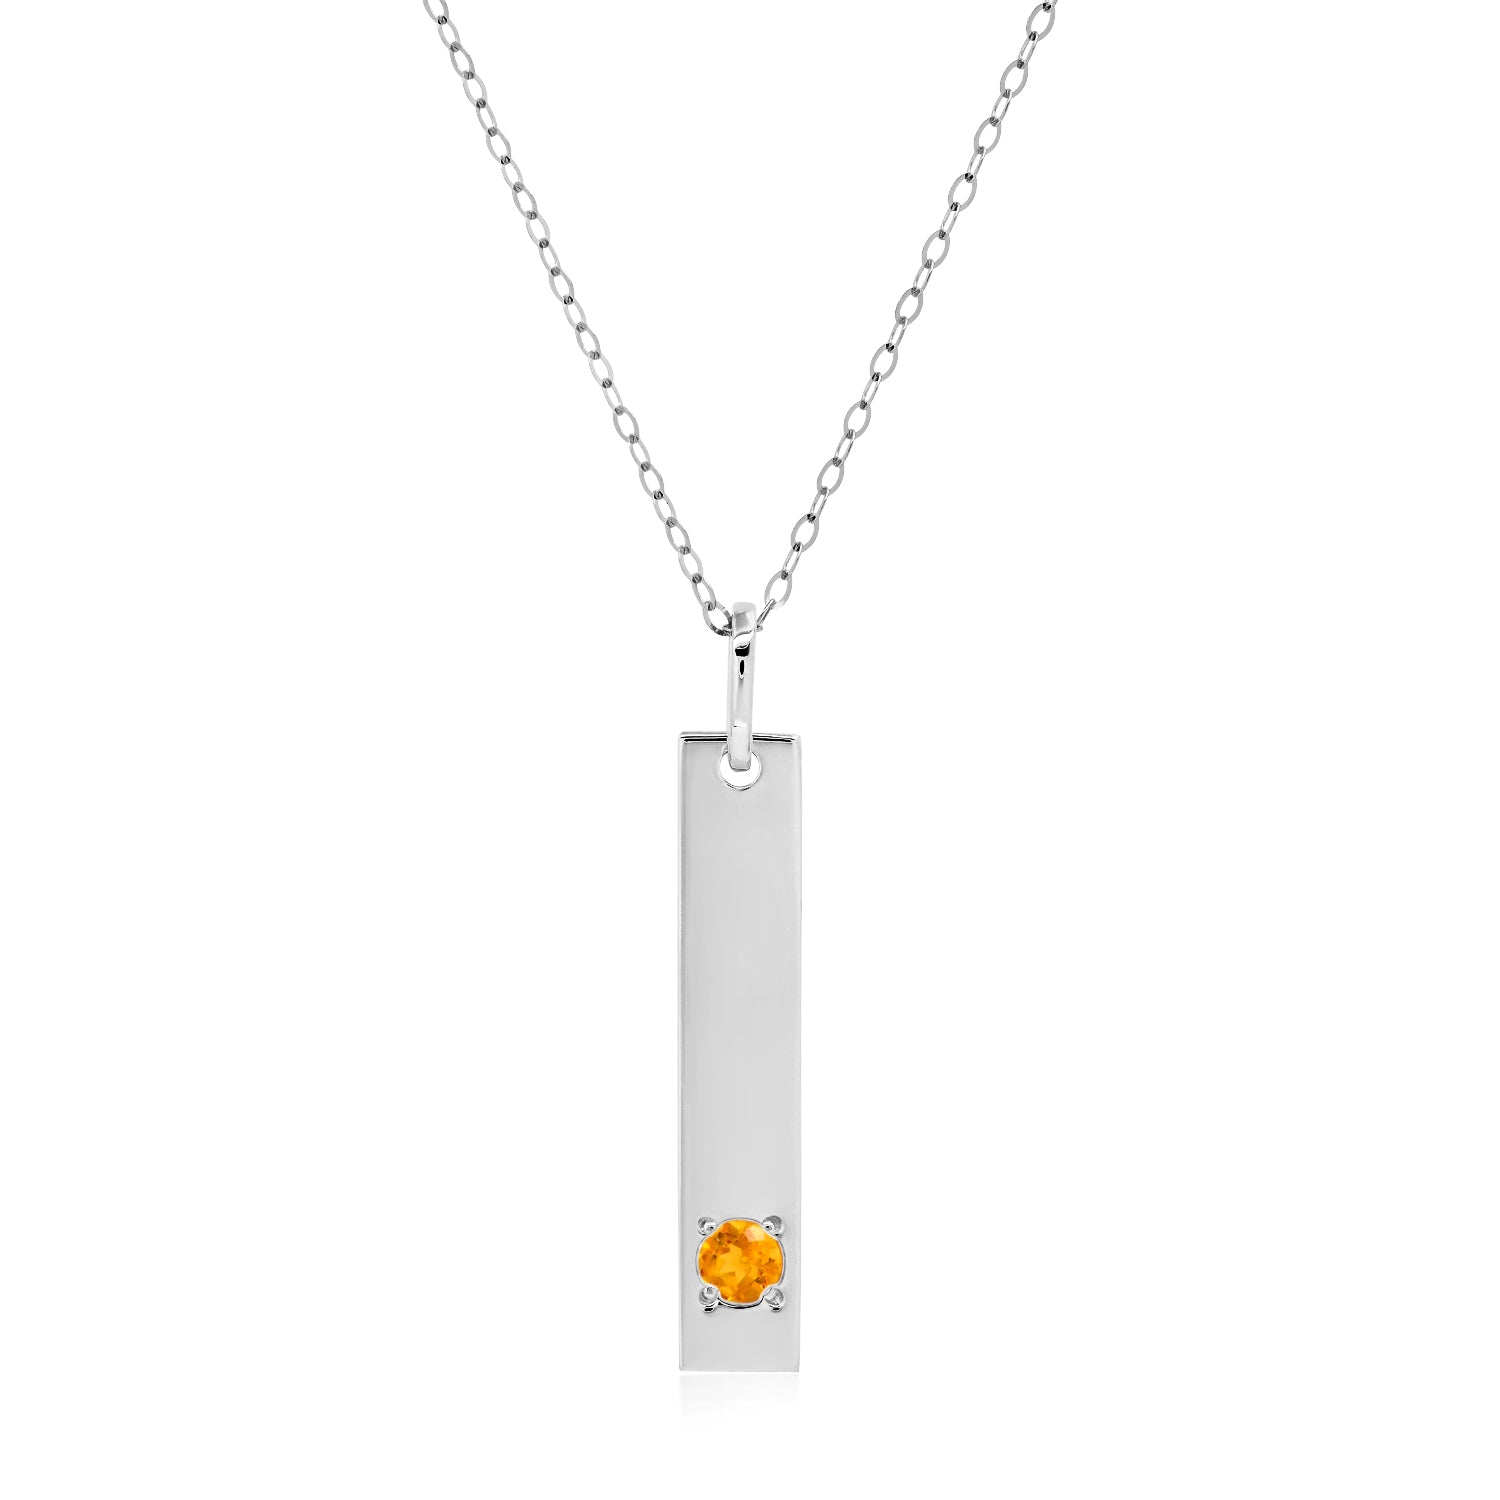 MAX + STONE 14k White Gold Bar Pendant Necklace with 3mm Small Round Gemstone Adjustable Cable Chain 16 Inches to 18 Inches with Spring Ring Clasp female